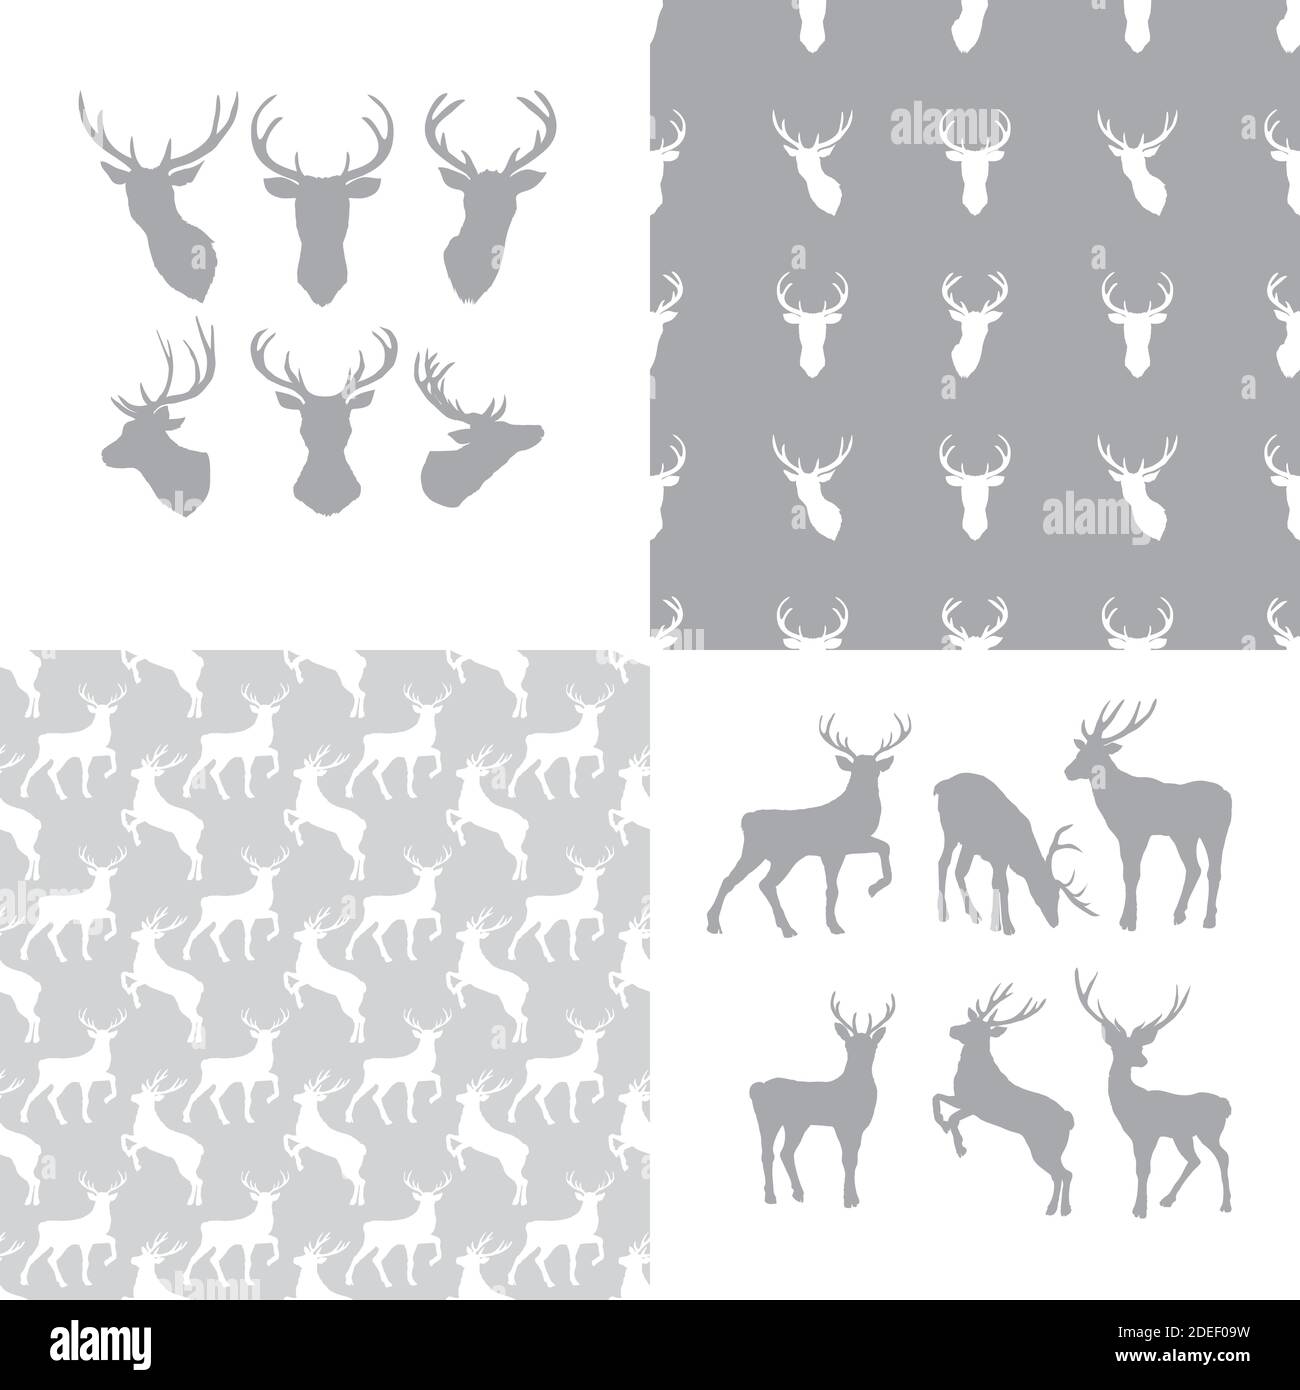 A set of deer heads and patterns. Collection of wild animal backgrounds Stock Vector